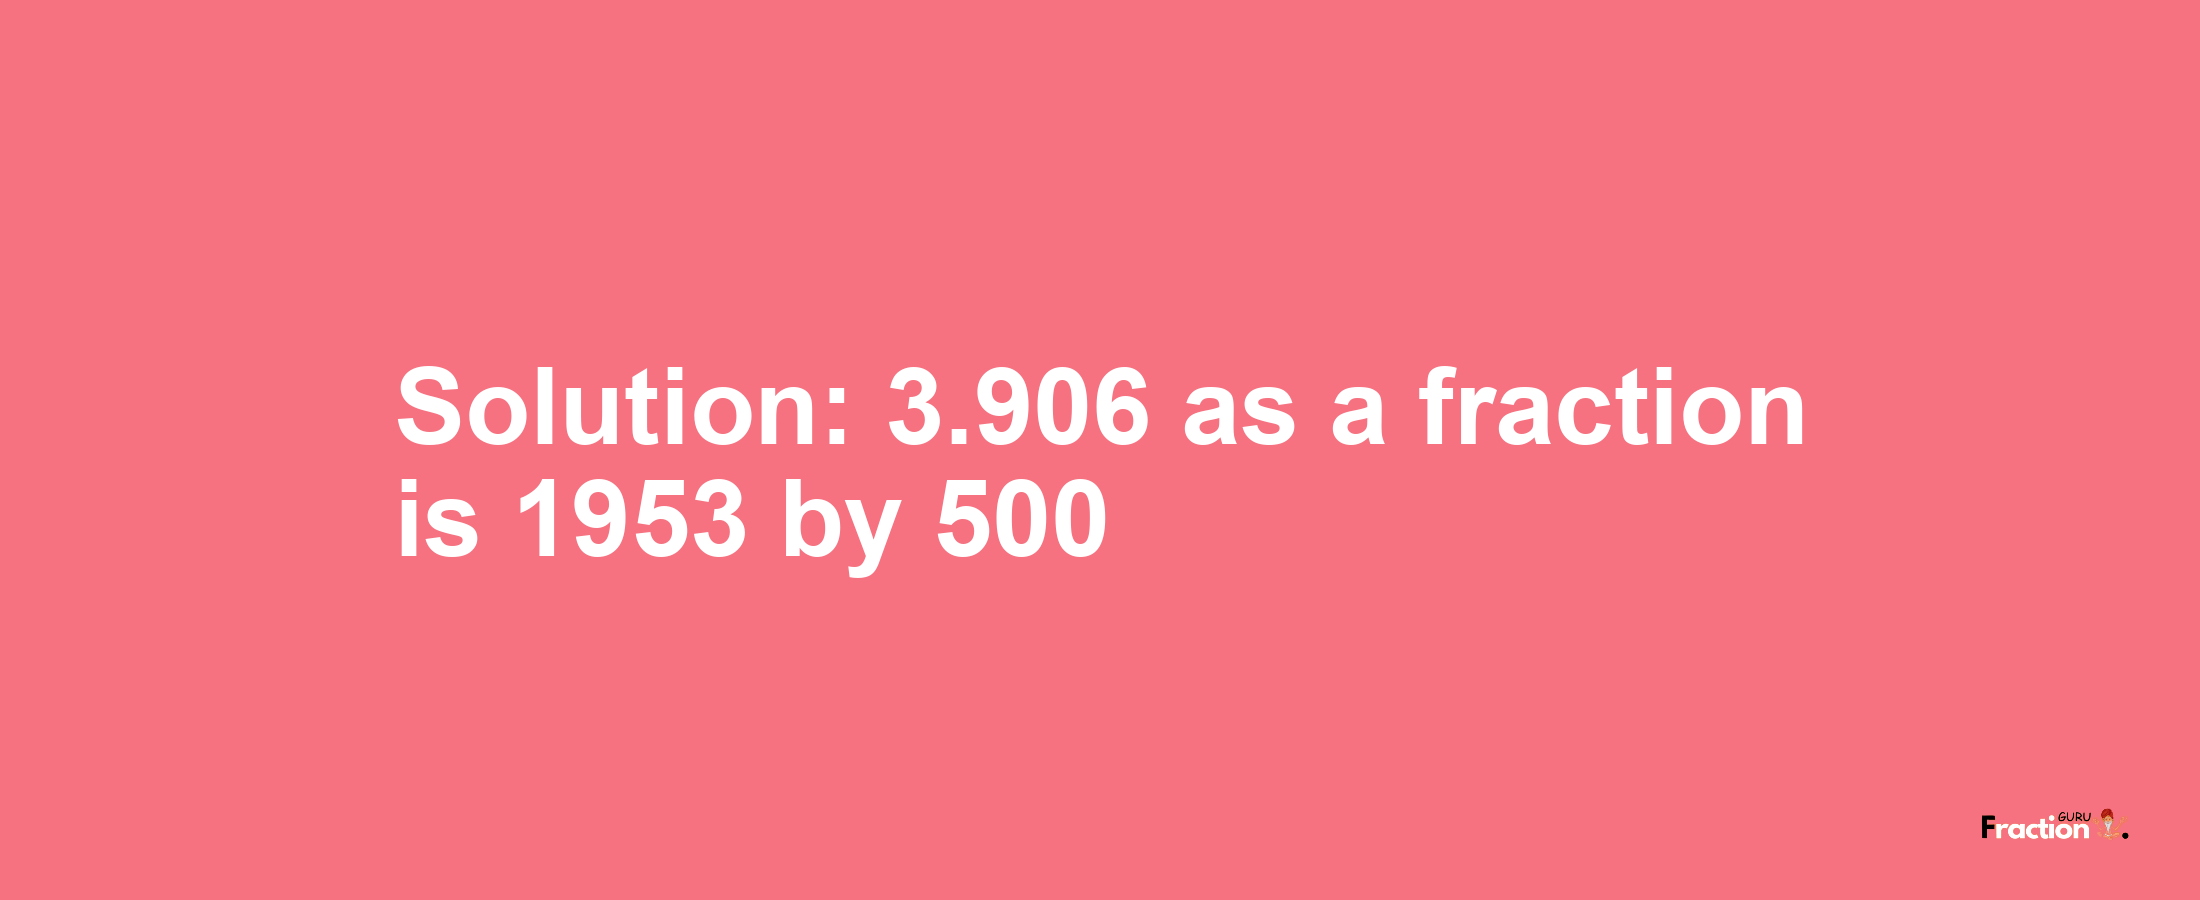 Solution:3.906 as a fraction is 1953/500